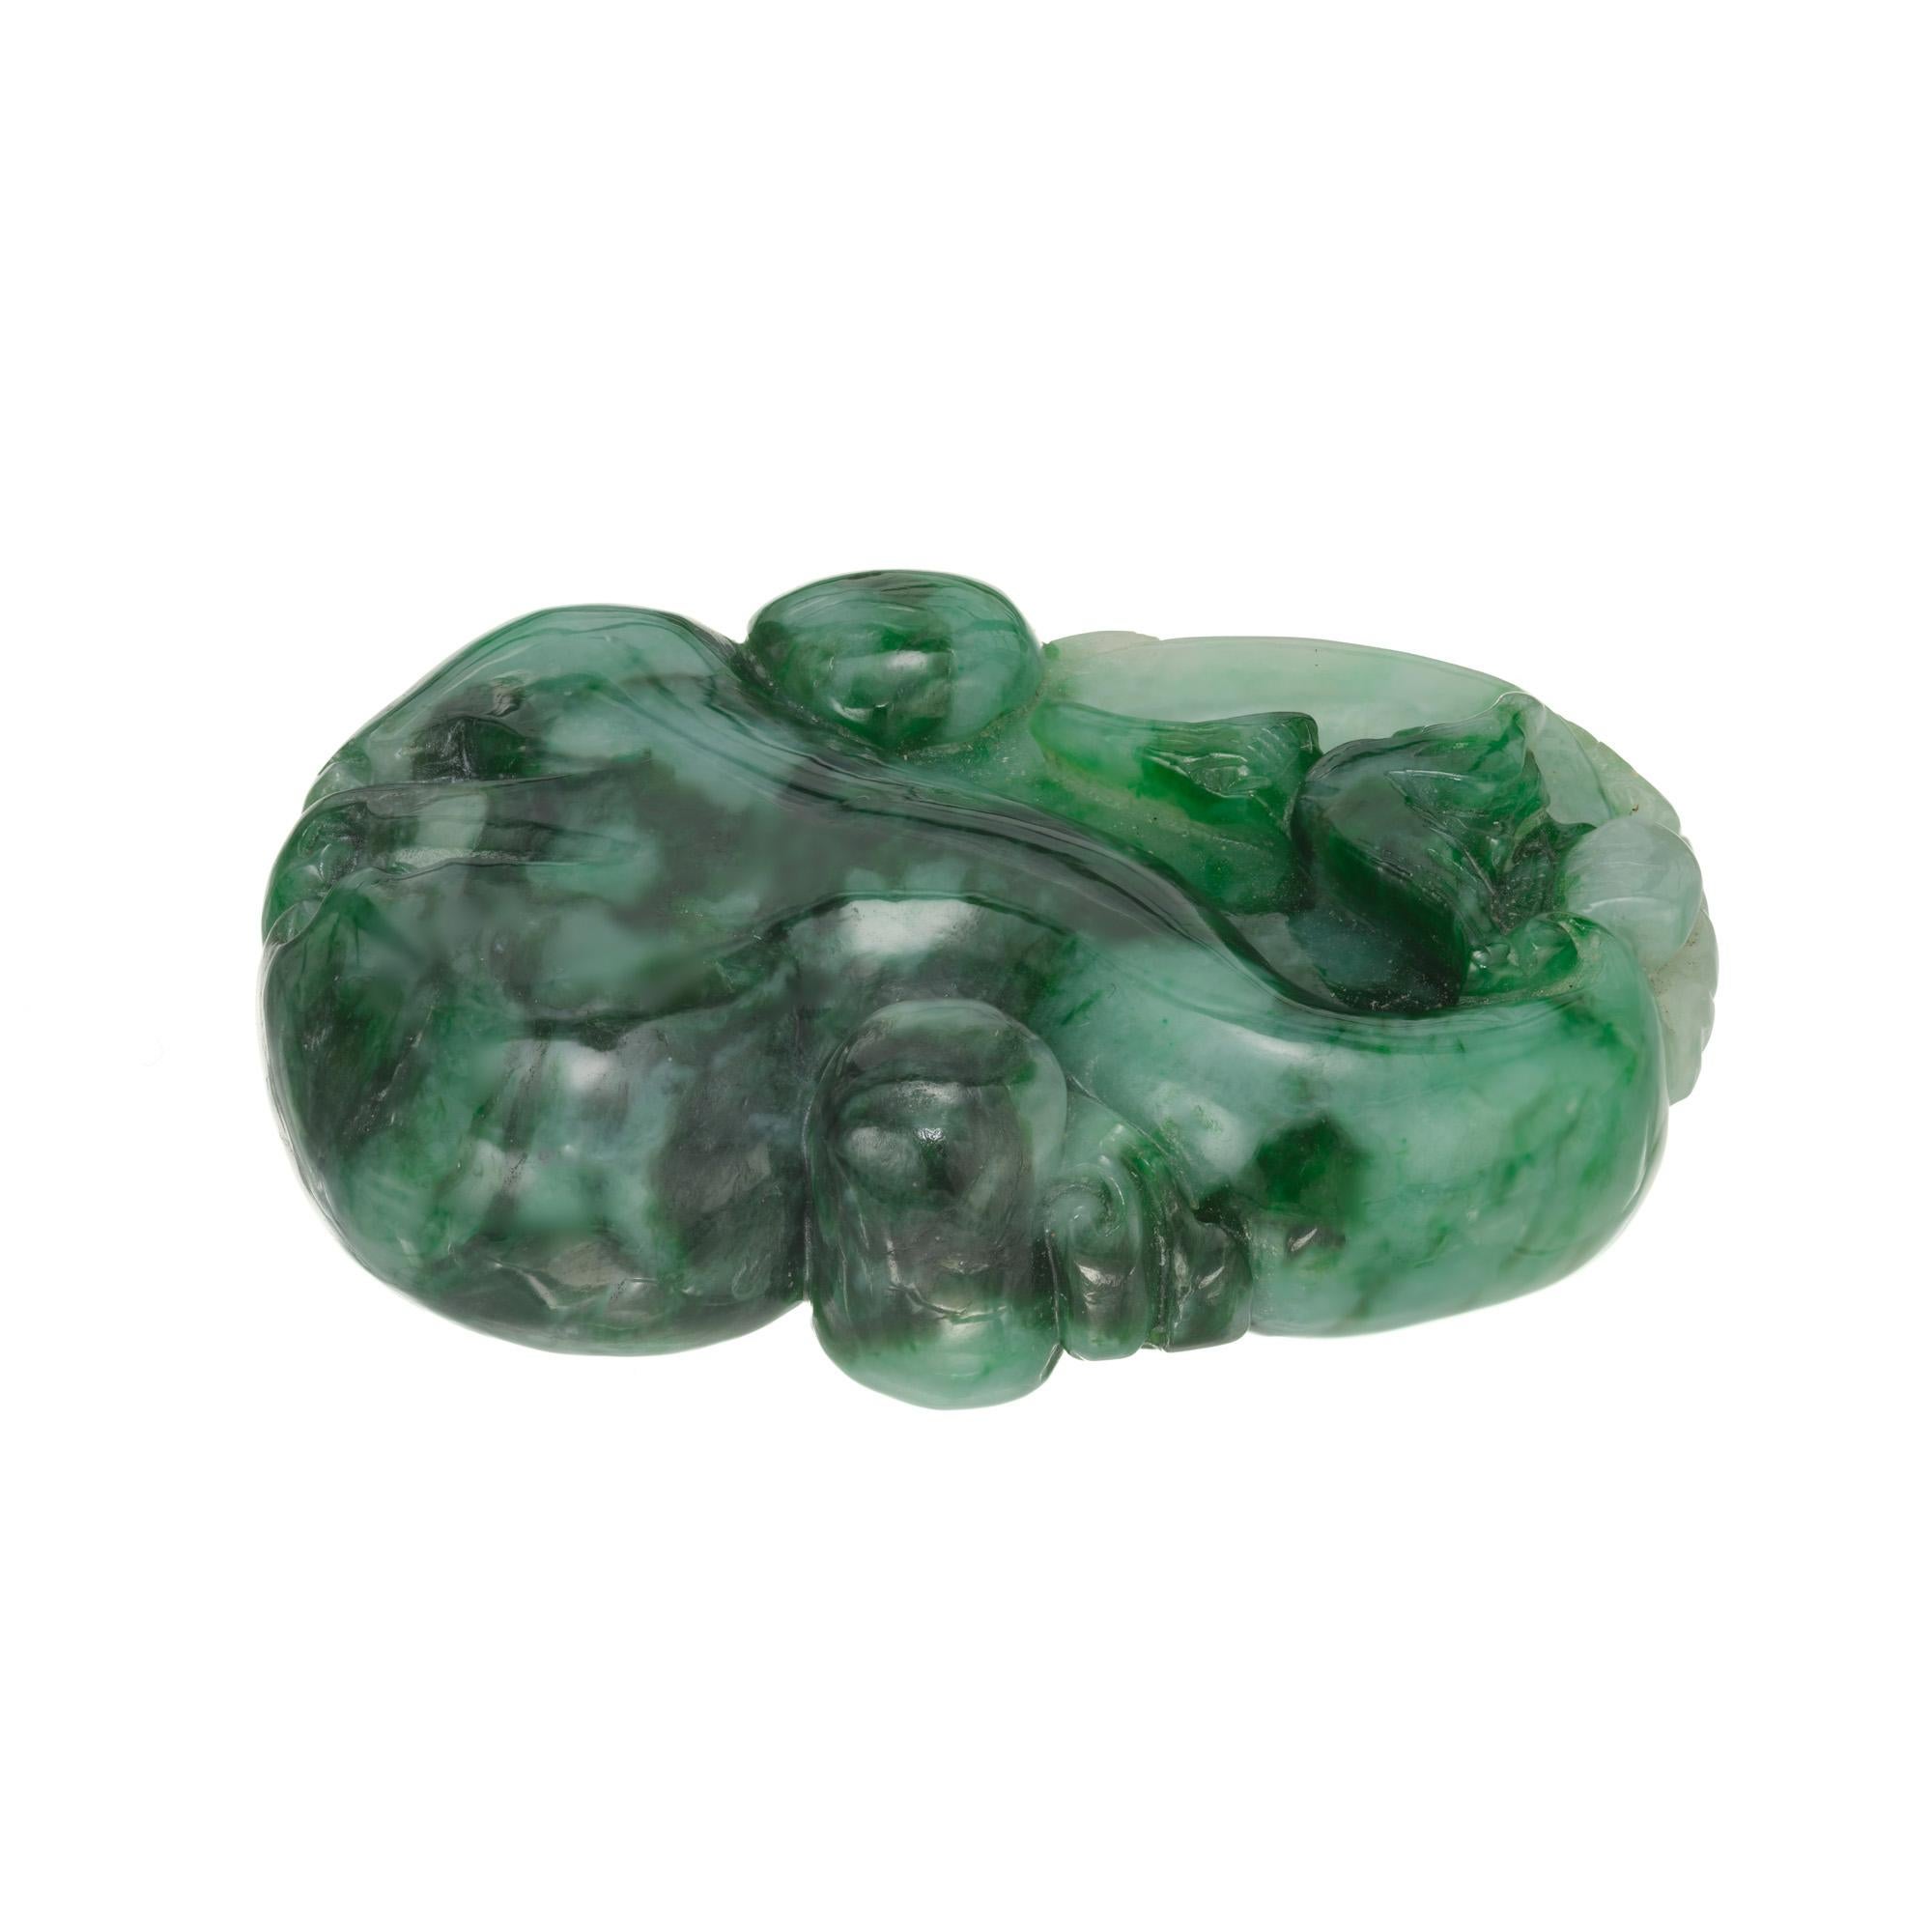 Jadeite Jade carved palm stone. Dark to white green. GIA certified natural. 

1 carved jade approx. 163.97cts. GIA Certified# 6224307578
Top to bottom: 43.5xmm or 1.7 inches
Width: 31.4mm or 1.25inches
Depth or thickness: 12.9mm
Weight: 32.8 grams

 